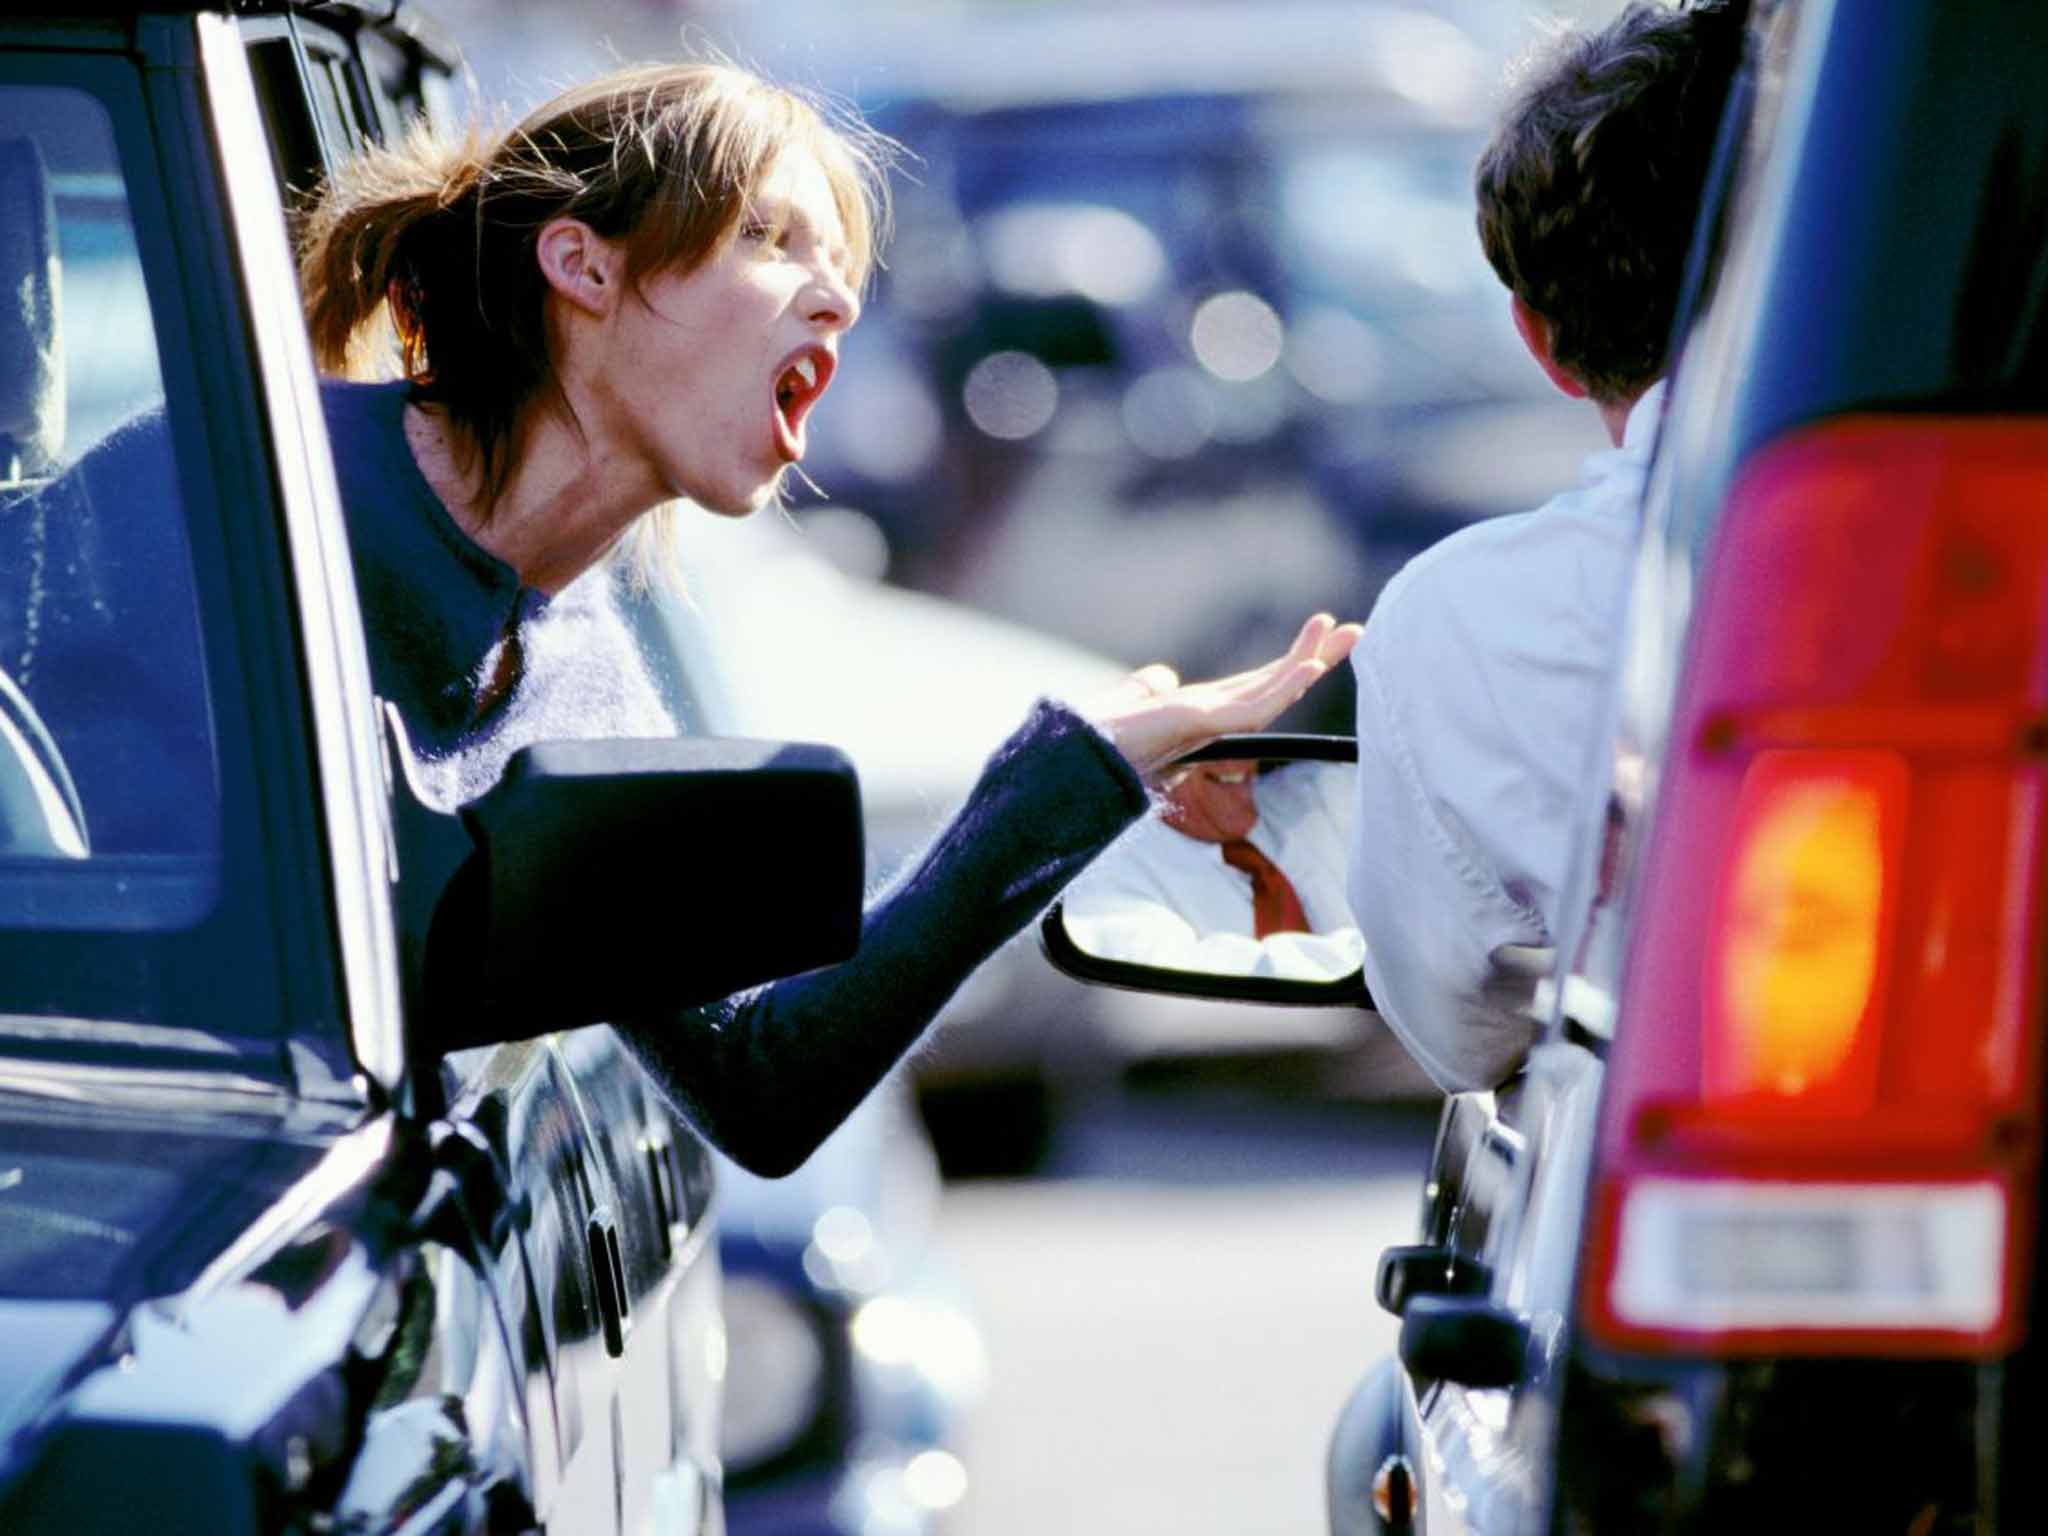 Modern conditions such as road rage did not exist when our brains’ defensive circuits of violence were formed